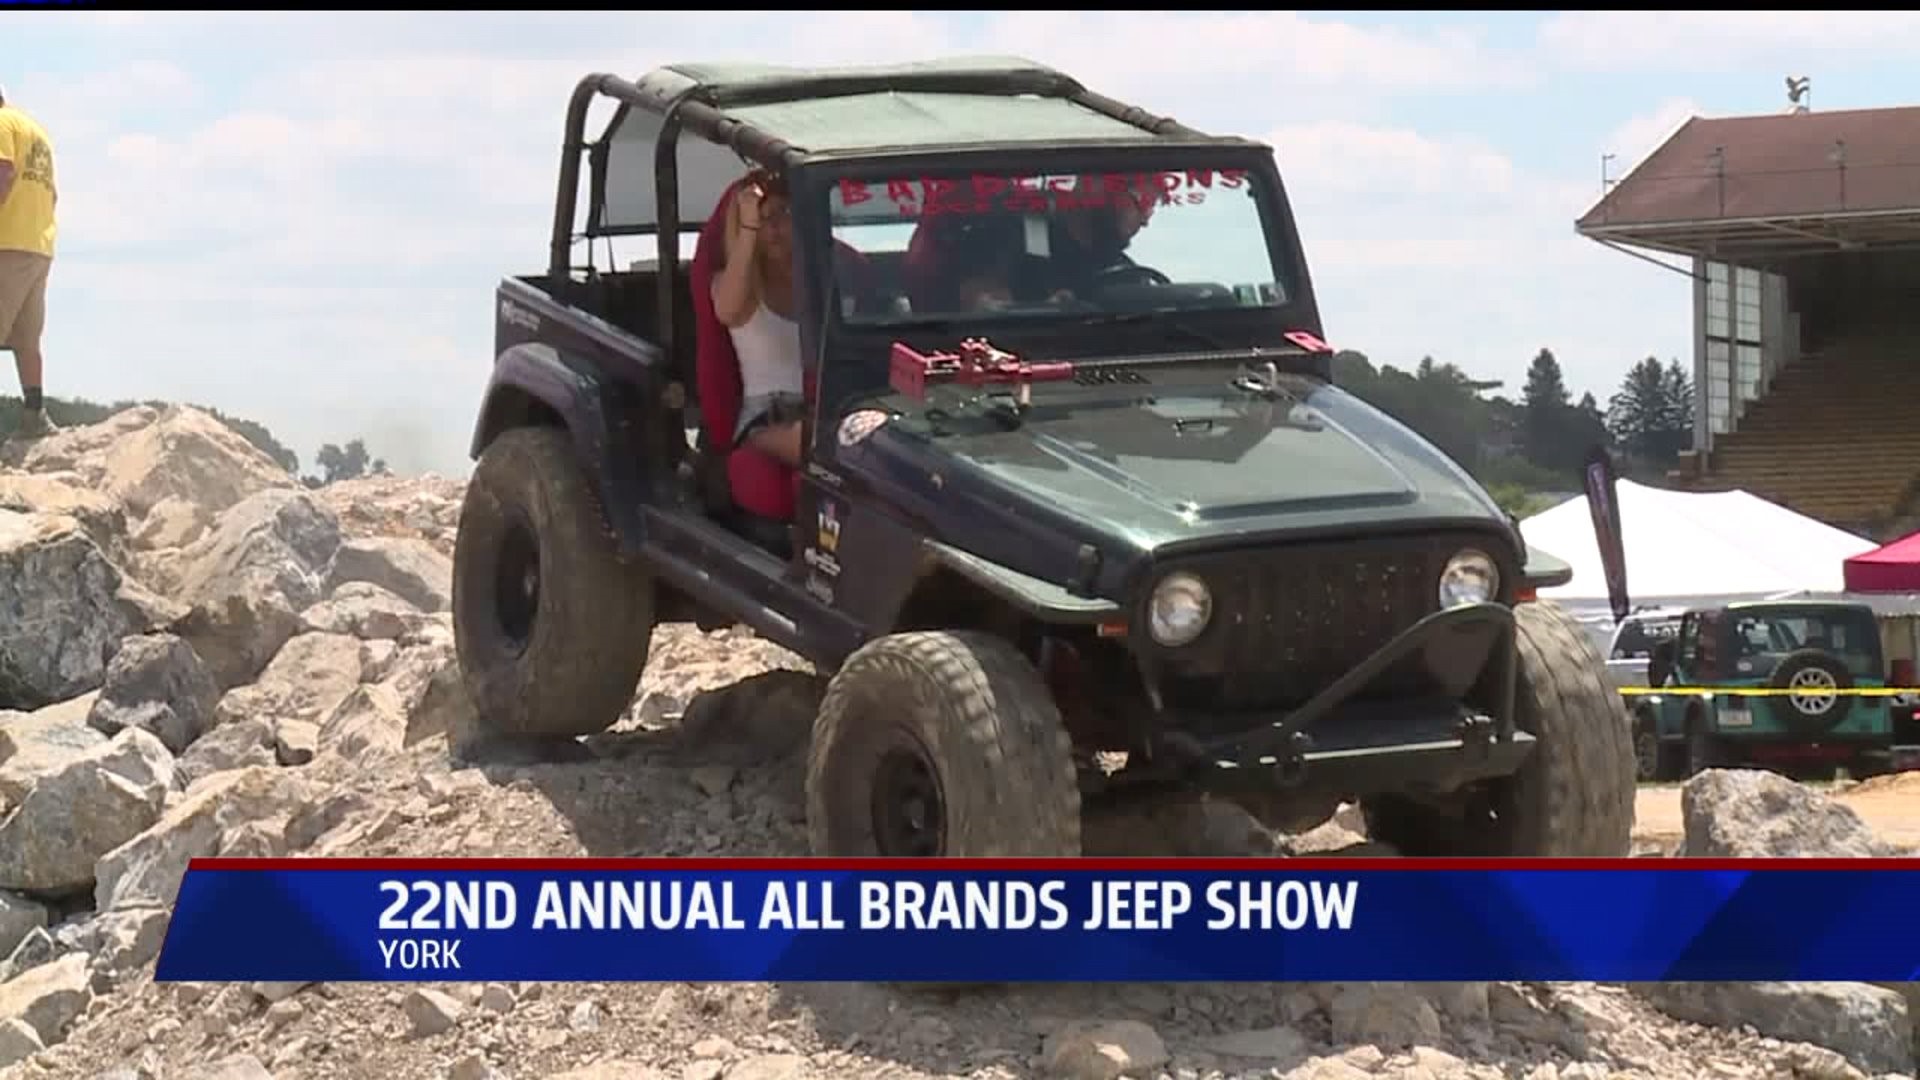 Annual "All Brands Jeep Show" kicks off in York